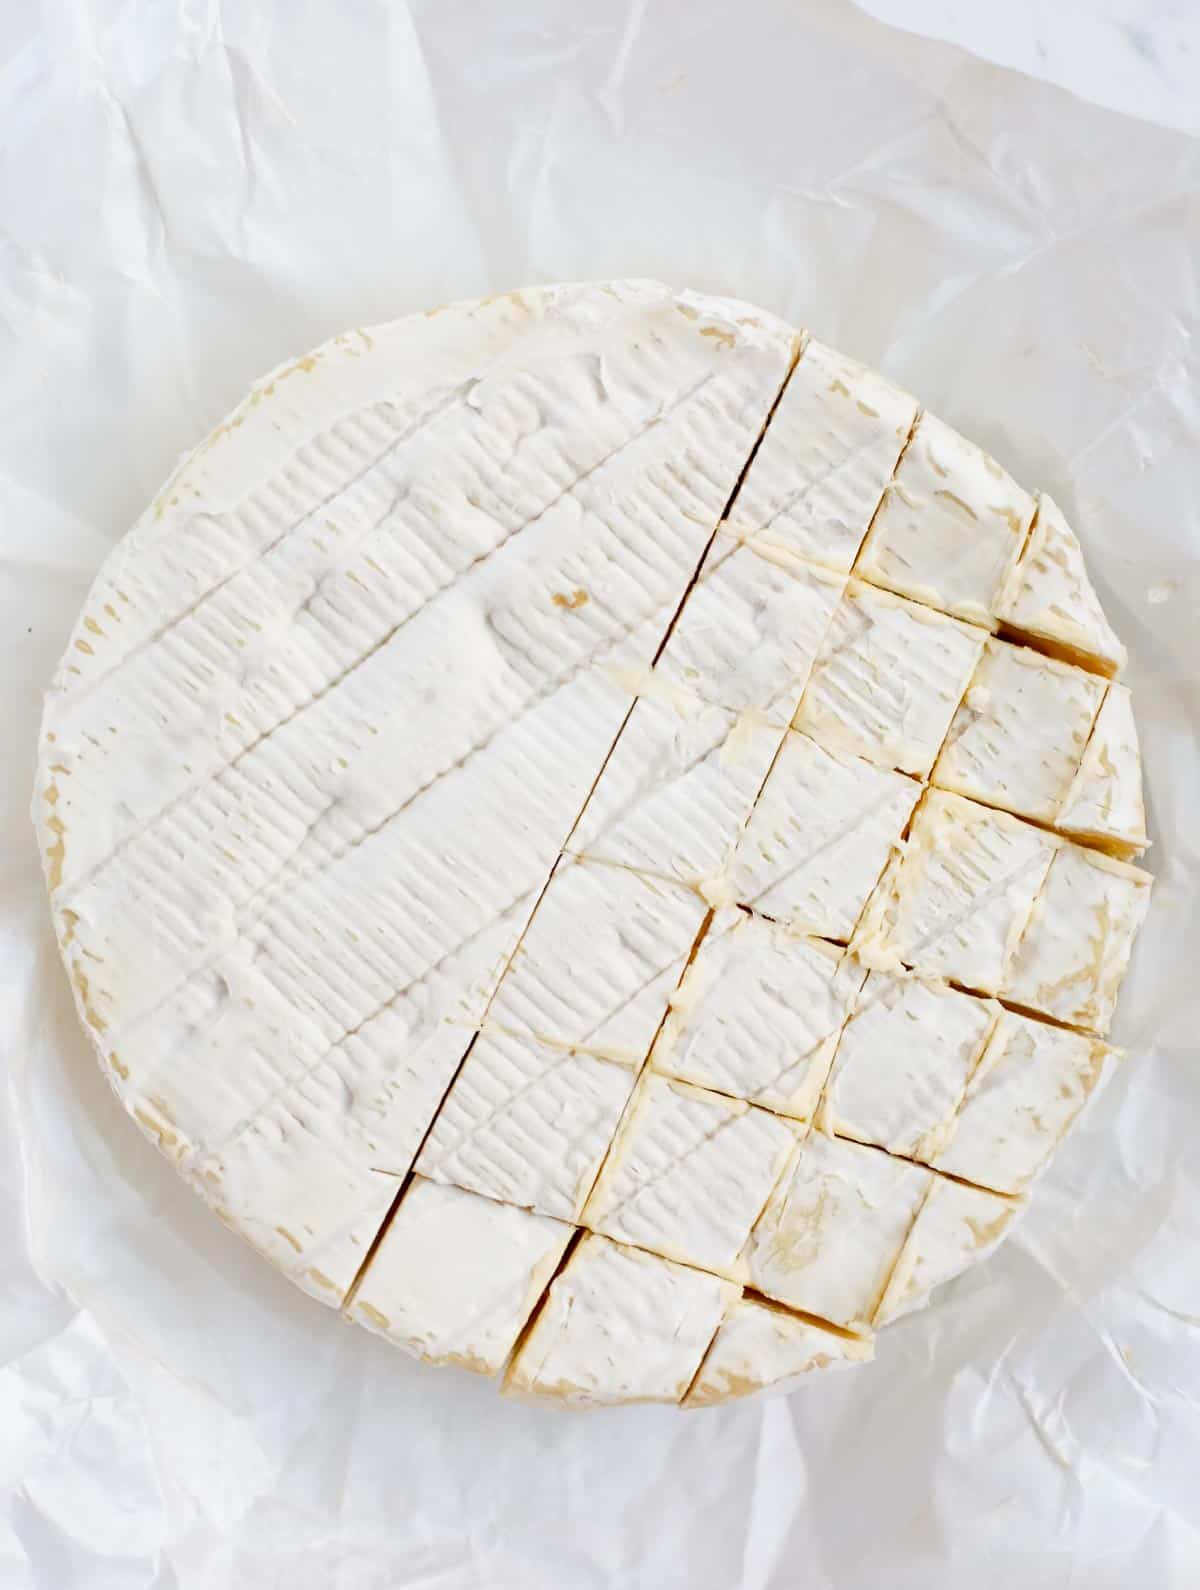 brie cheese cut into small bites